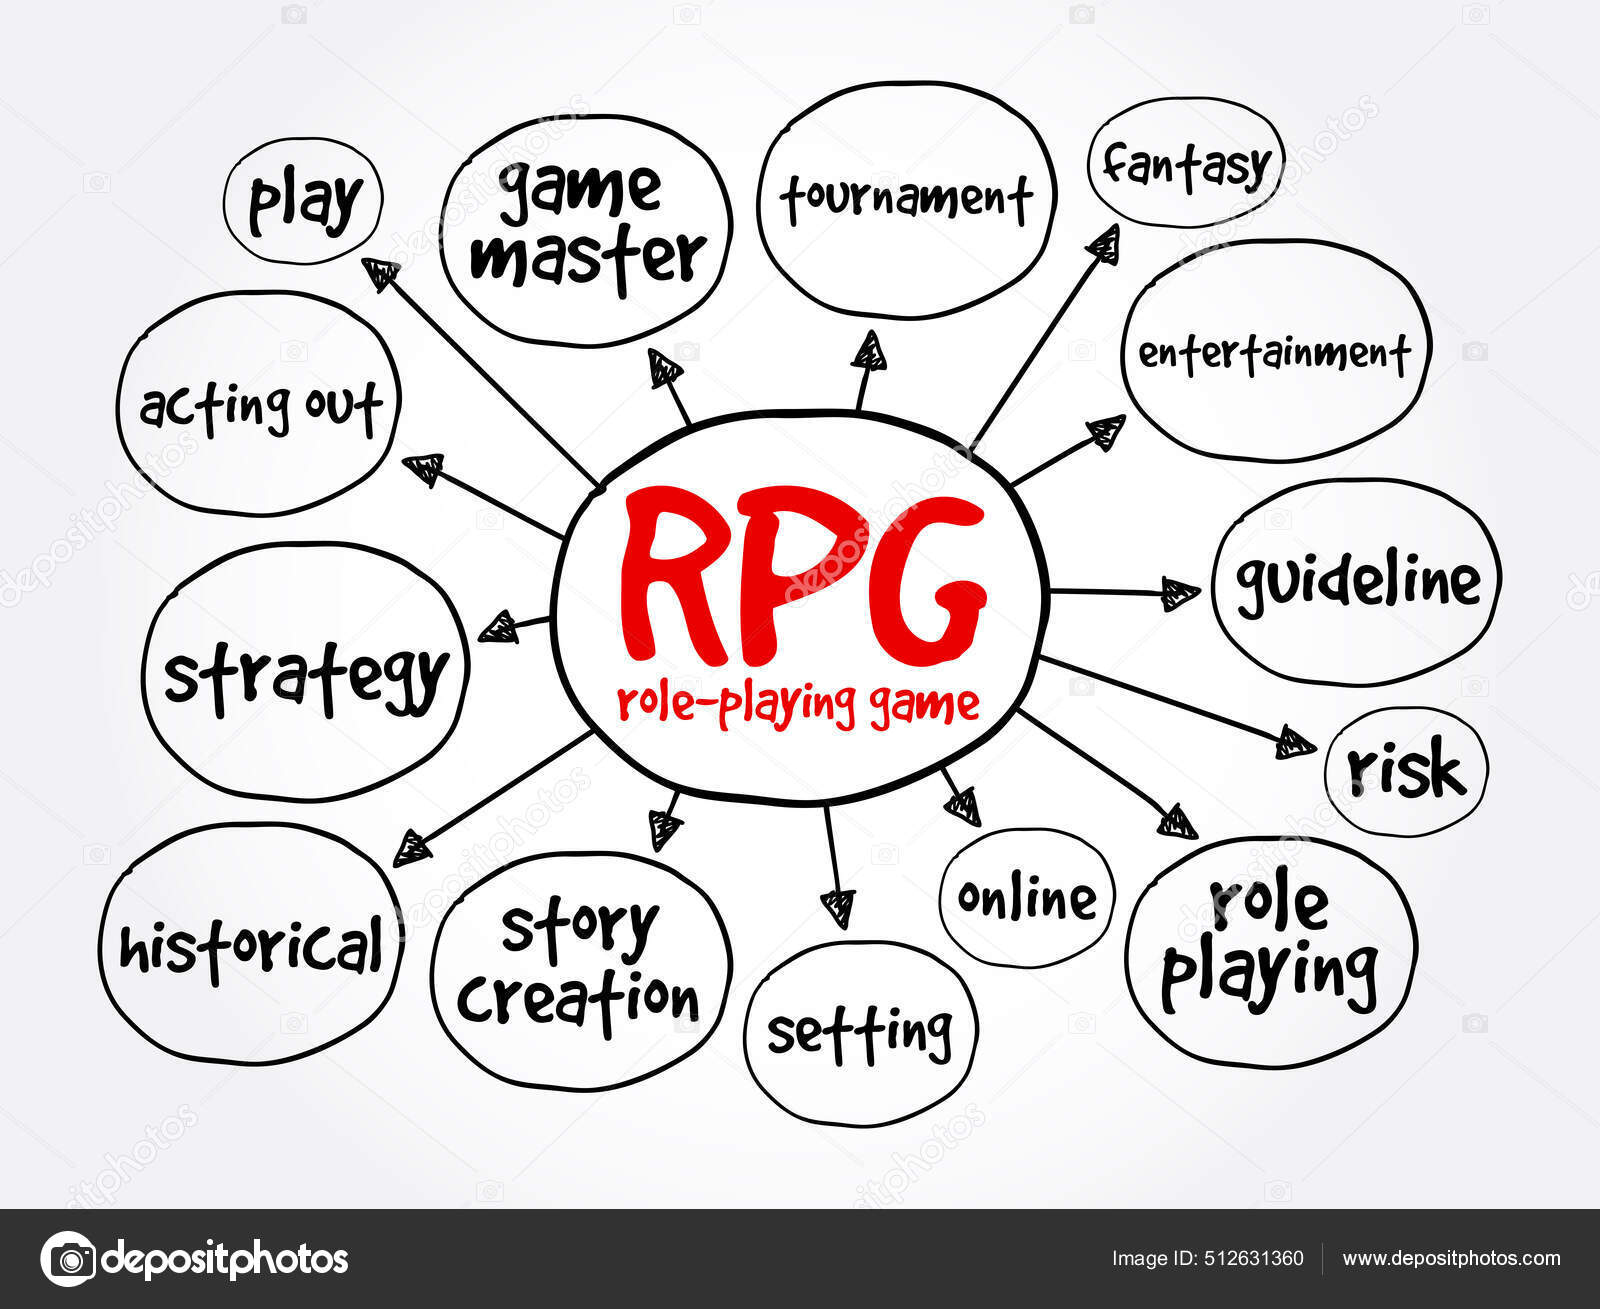 RPG - Role-Playing Game Mind Map, Concept For Presentations And Reports  Royalty Free SVG, Cliparts, Vectors, and Stock Illustration. Image  174756309.